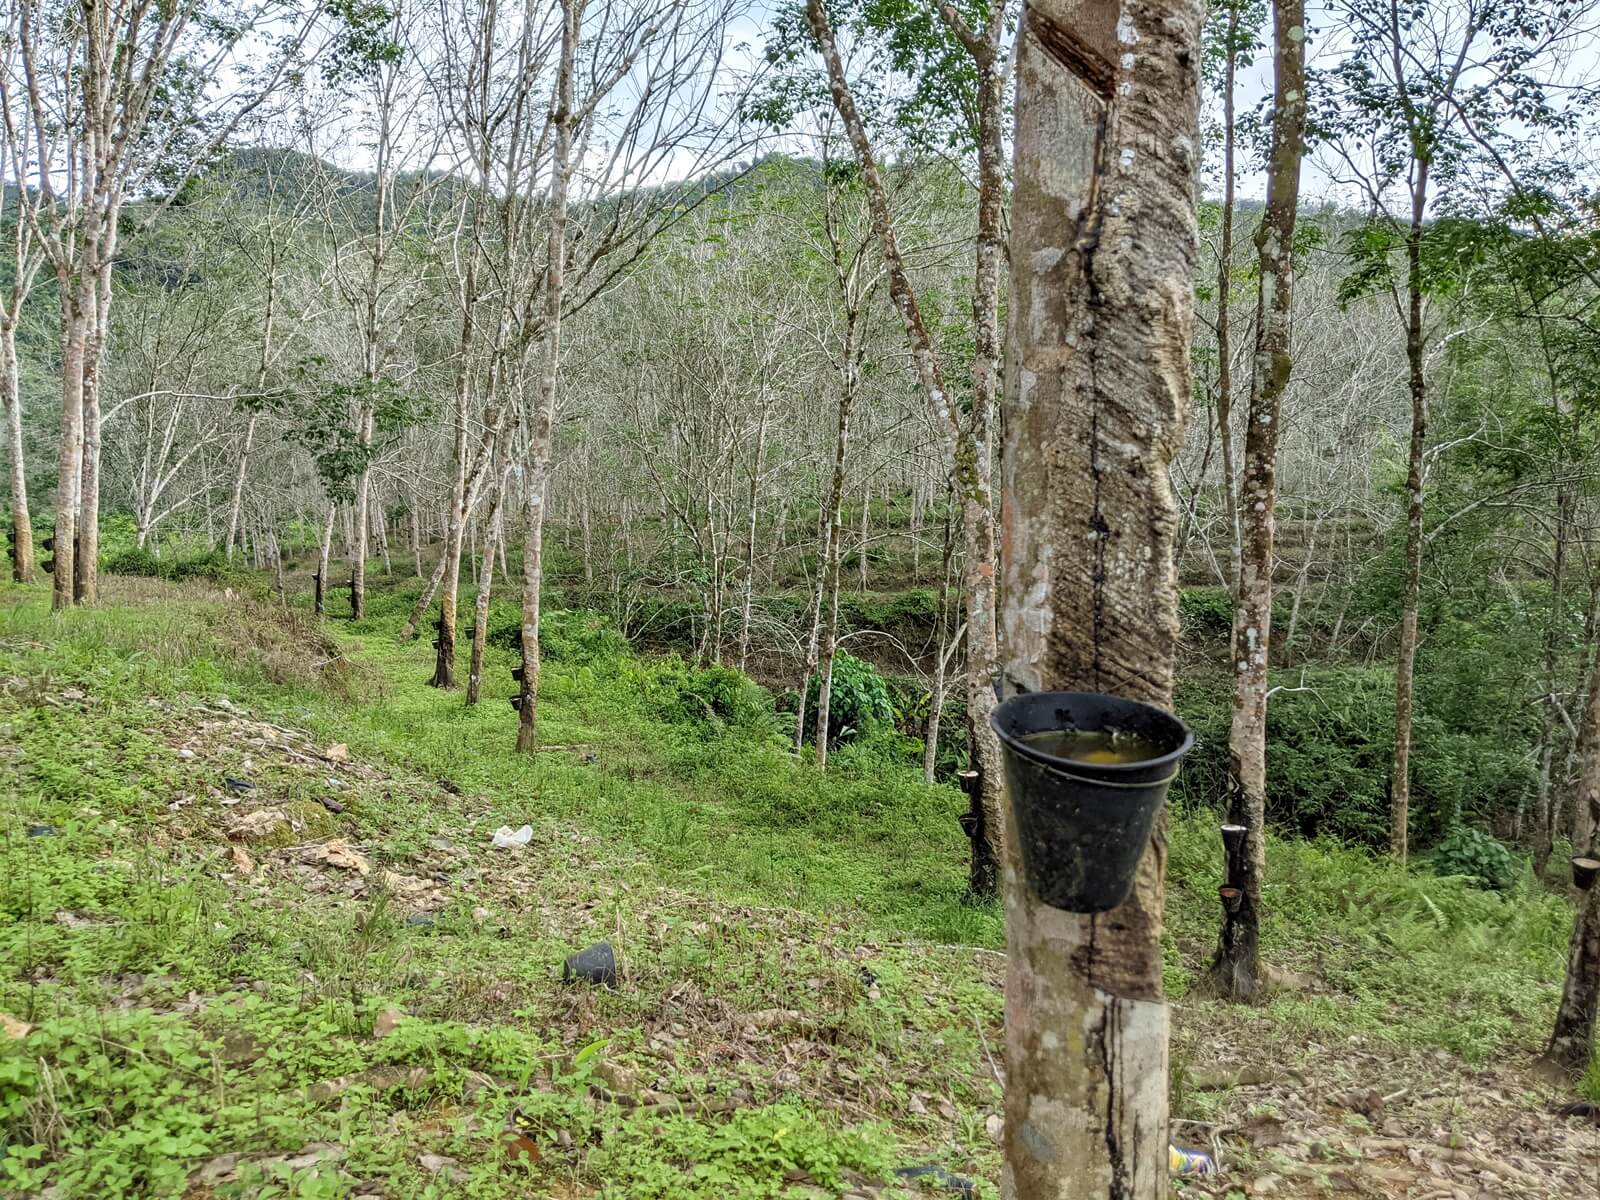 Rubber trees of the Timber Latex Clone variety growing in a forest plantation inside the Lebir forest reserve, Kelantan. 18 November 2021 (YH Law)